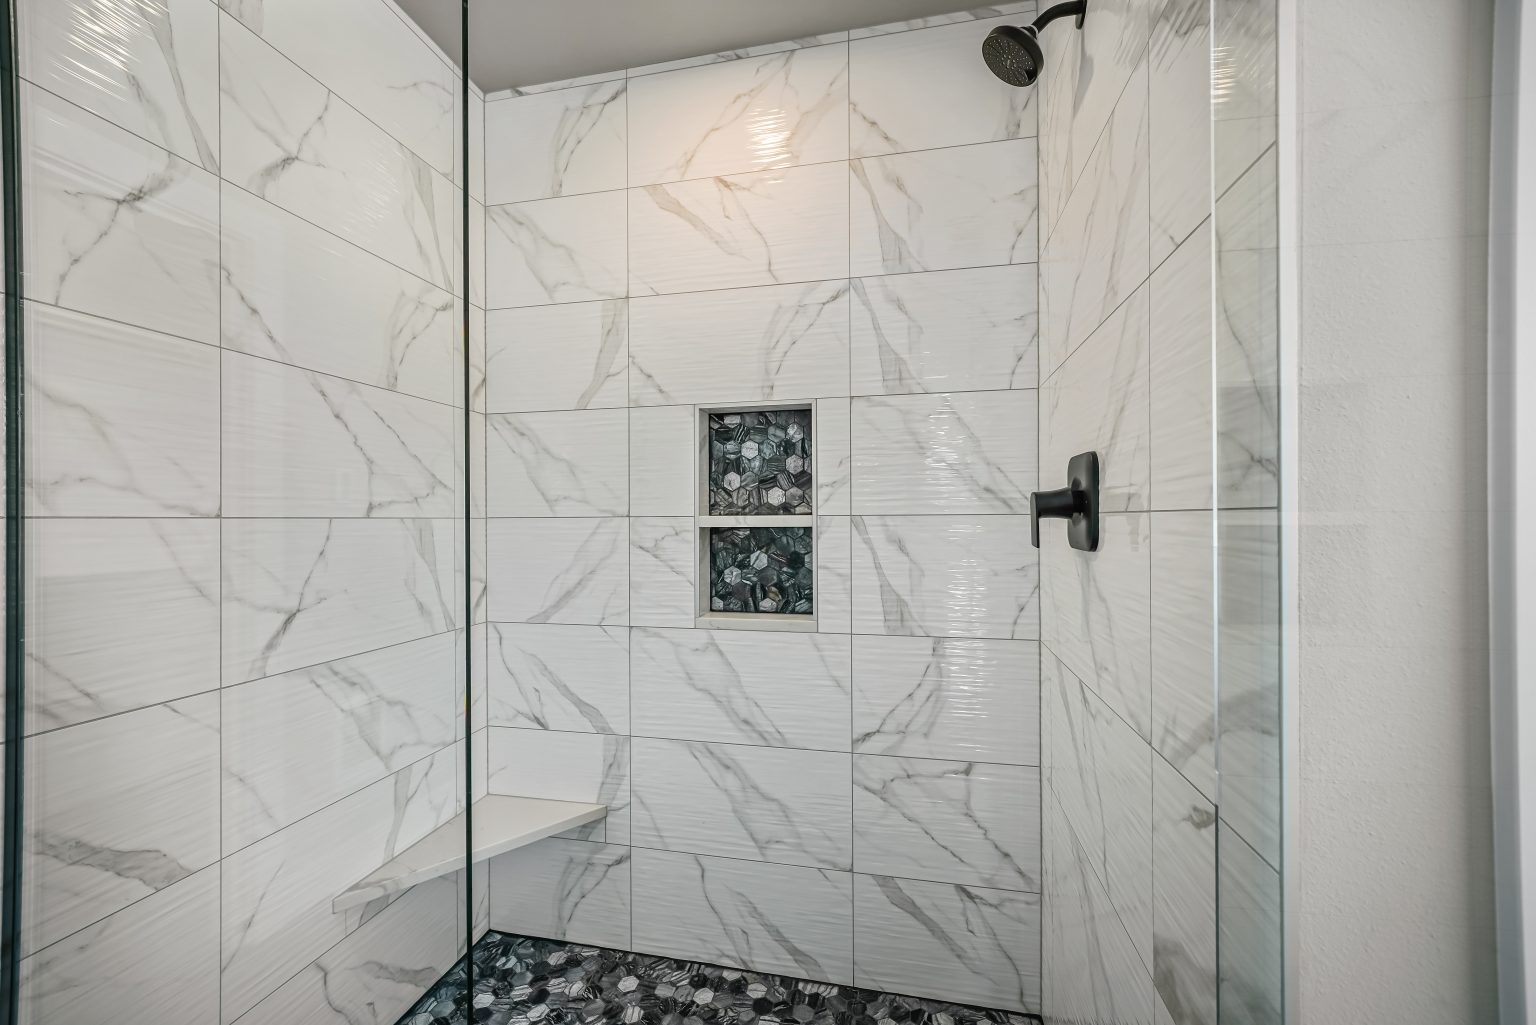 shower with black faucet and shower head, glass doors, and white tiles with gray veining that has two built-in shelves that have tile backsplash that matches the tile flooring